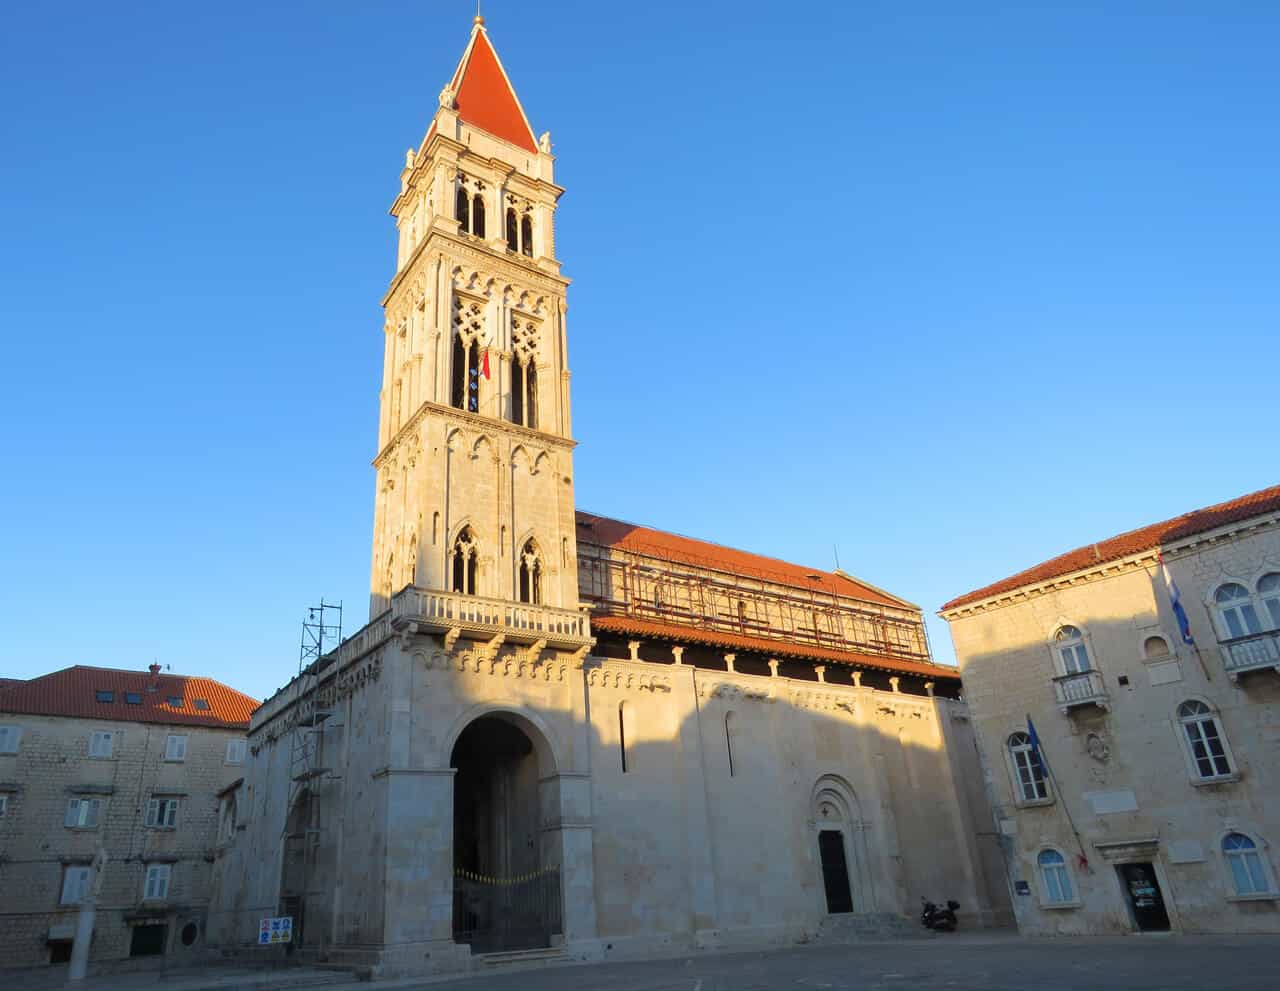 St Lawrence Cathedral and its bell tower, Trogir